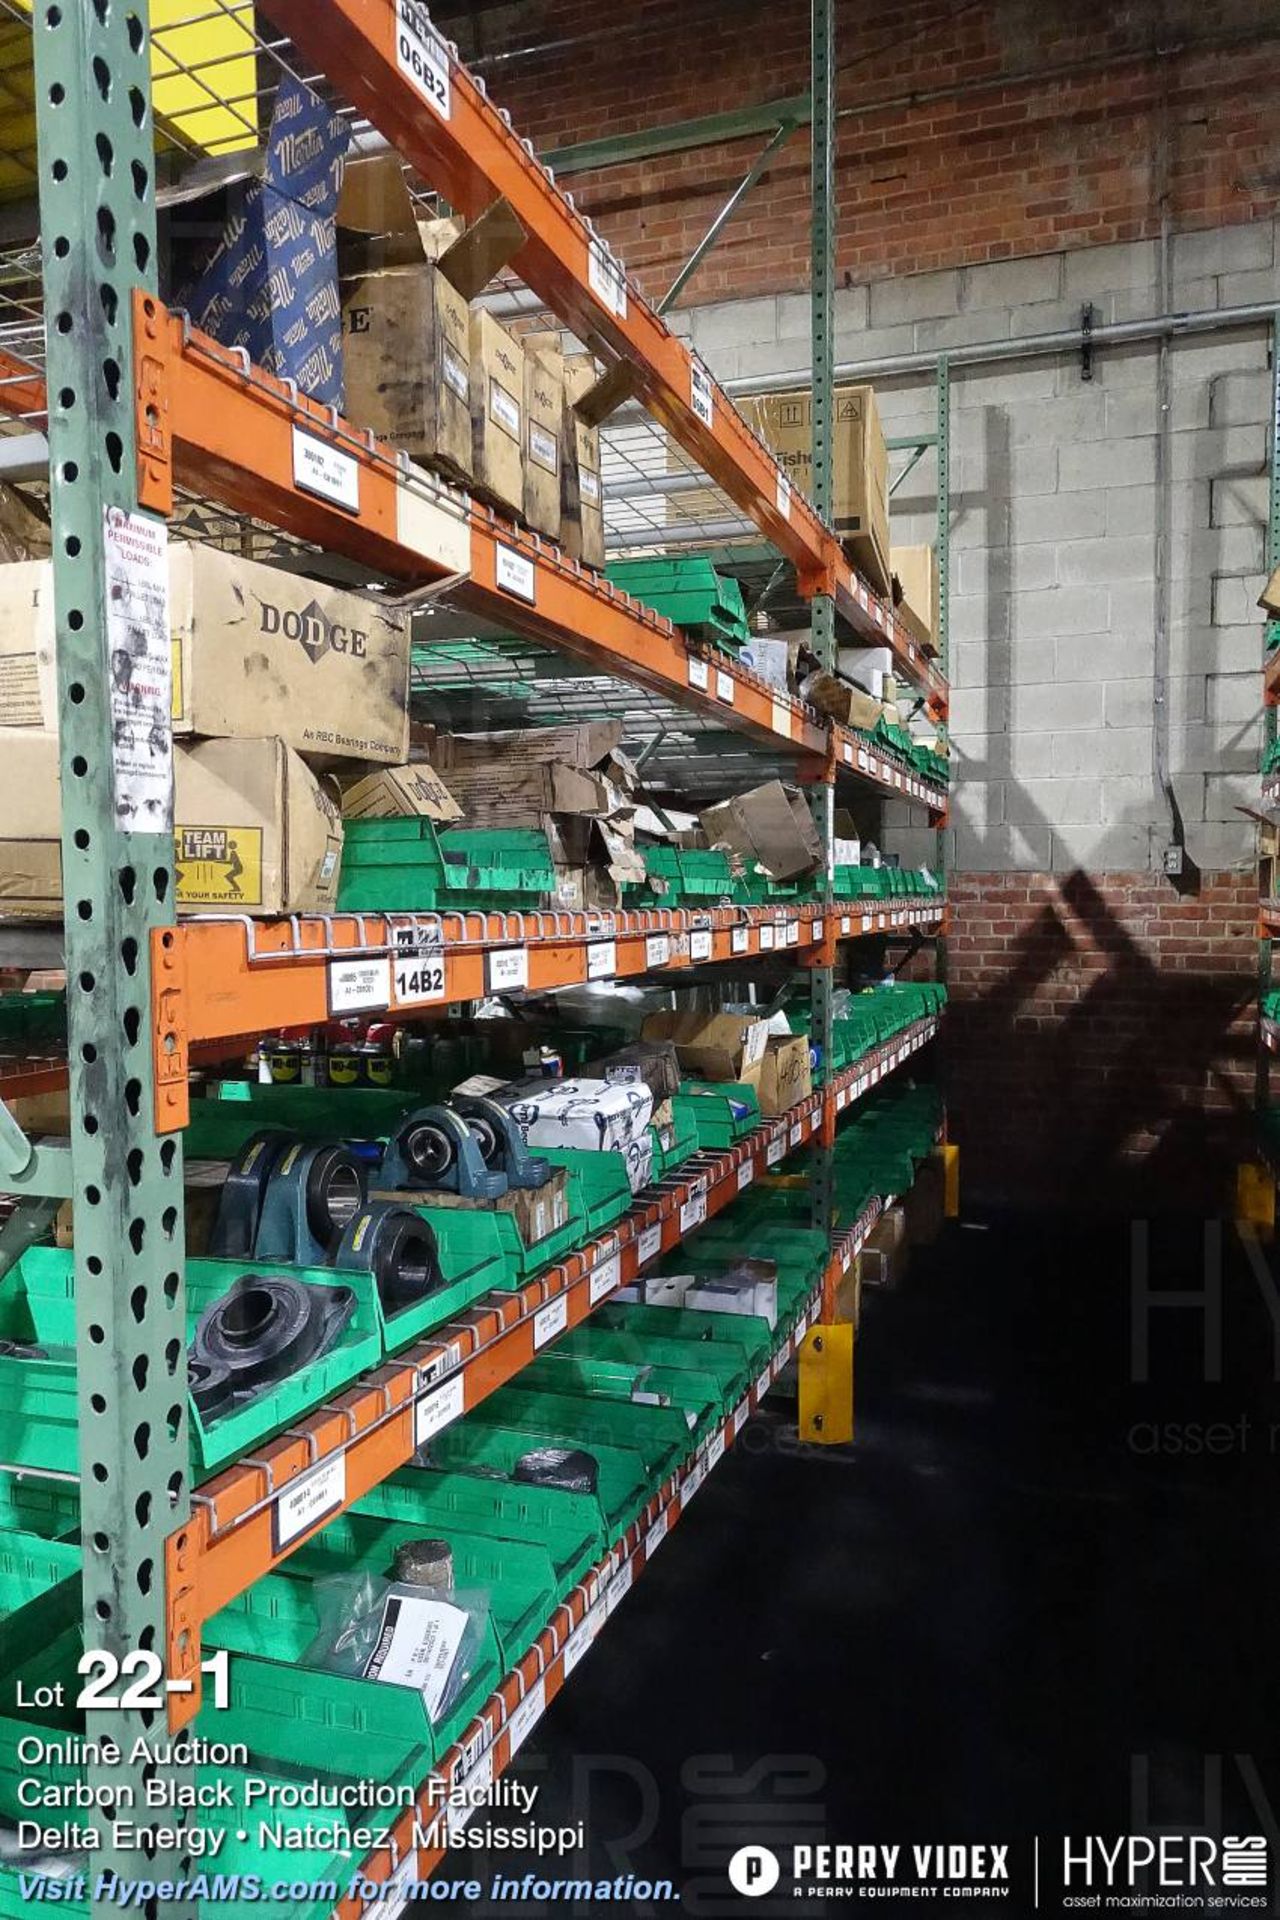 Contents Rack with Dodge bearings, fuses, pillow blocks, fittings, lubricants and more